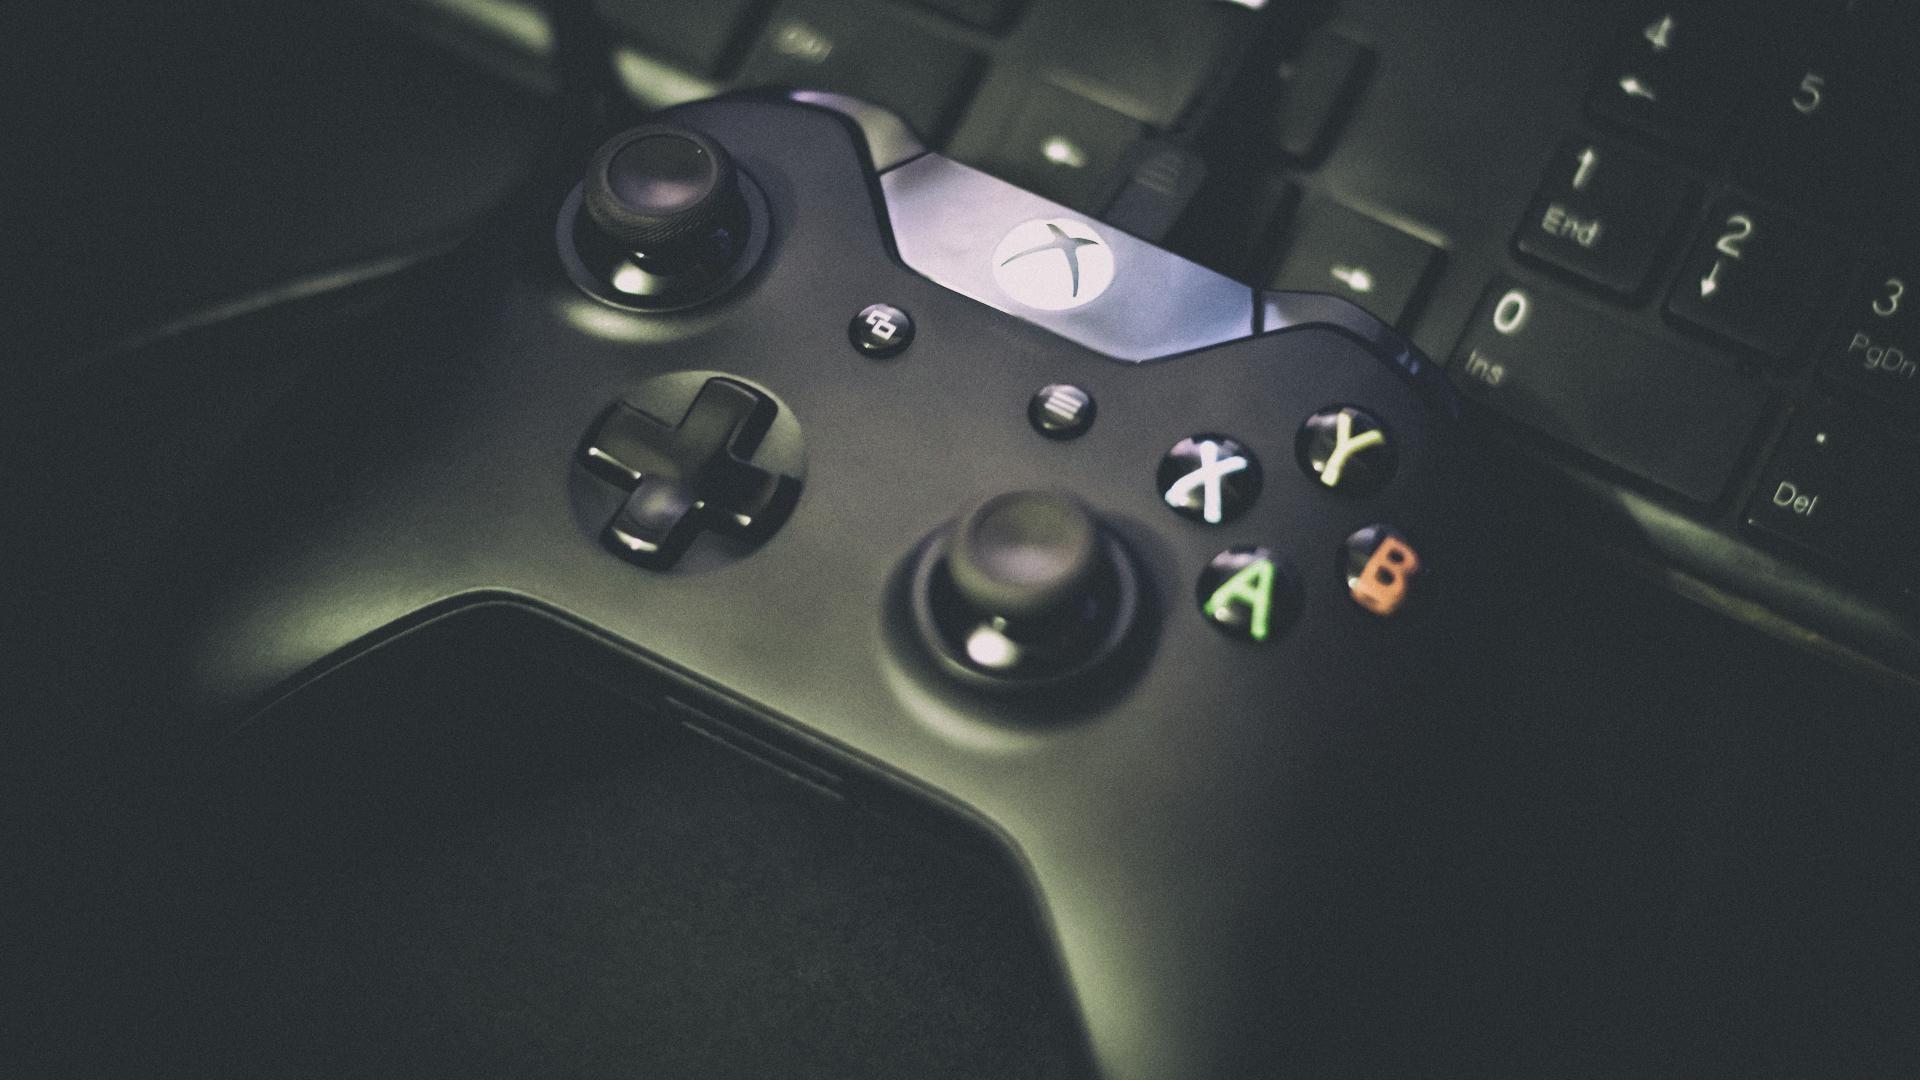 Xbox, xbox one, console, gamepad, joystick wallpaper. other